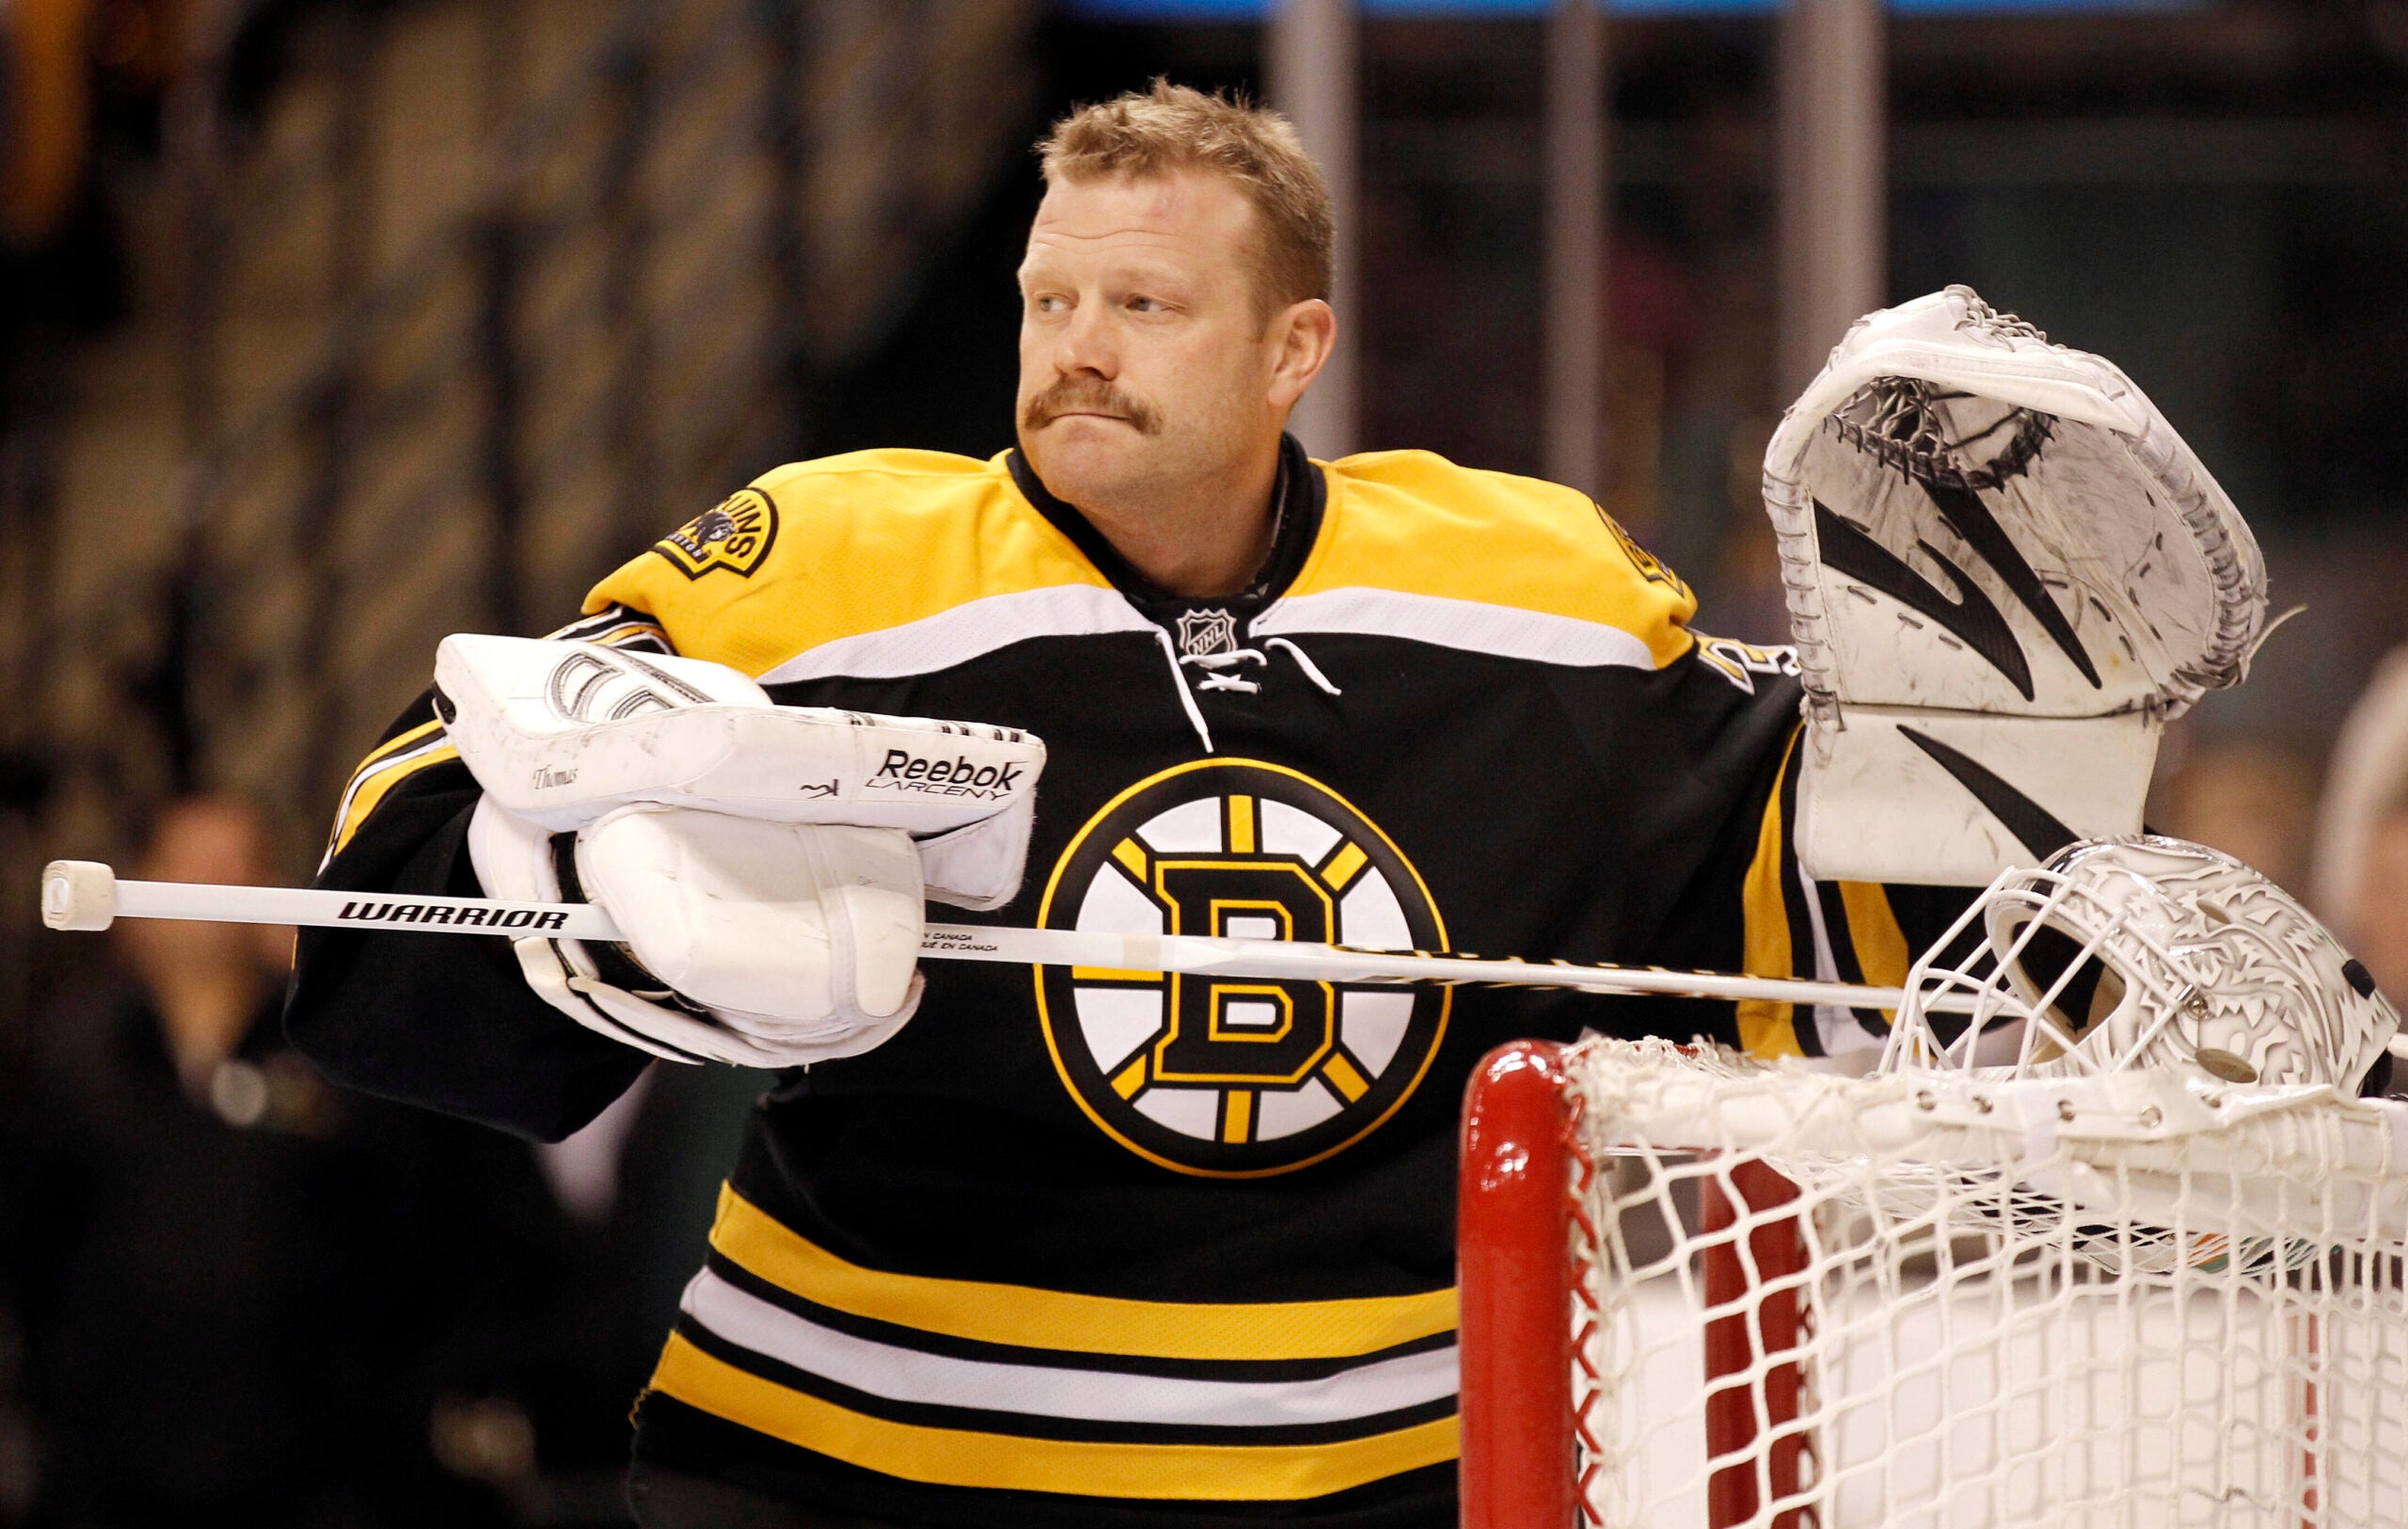 Tim Thomas gets emotional, sheds light on why he fell off the grid  following retirement – NBC Sports Boston